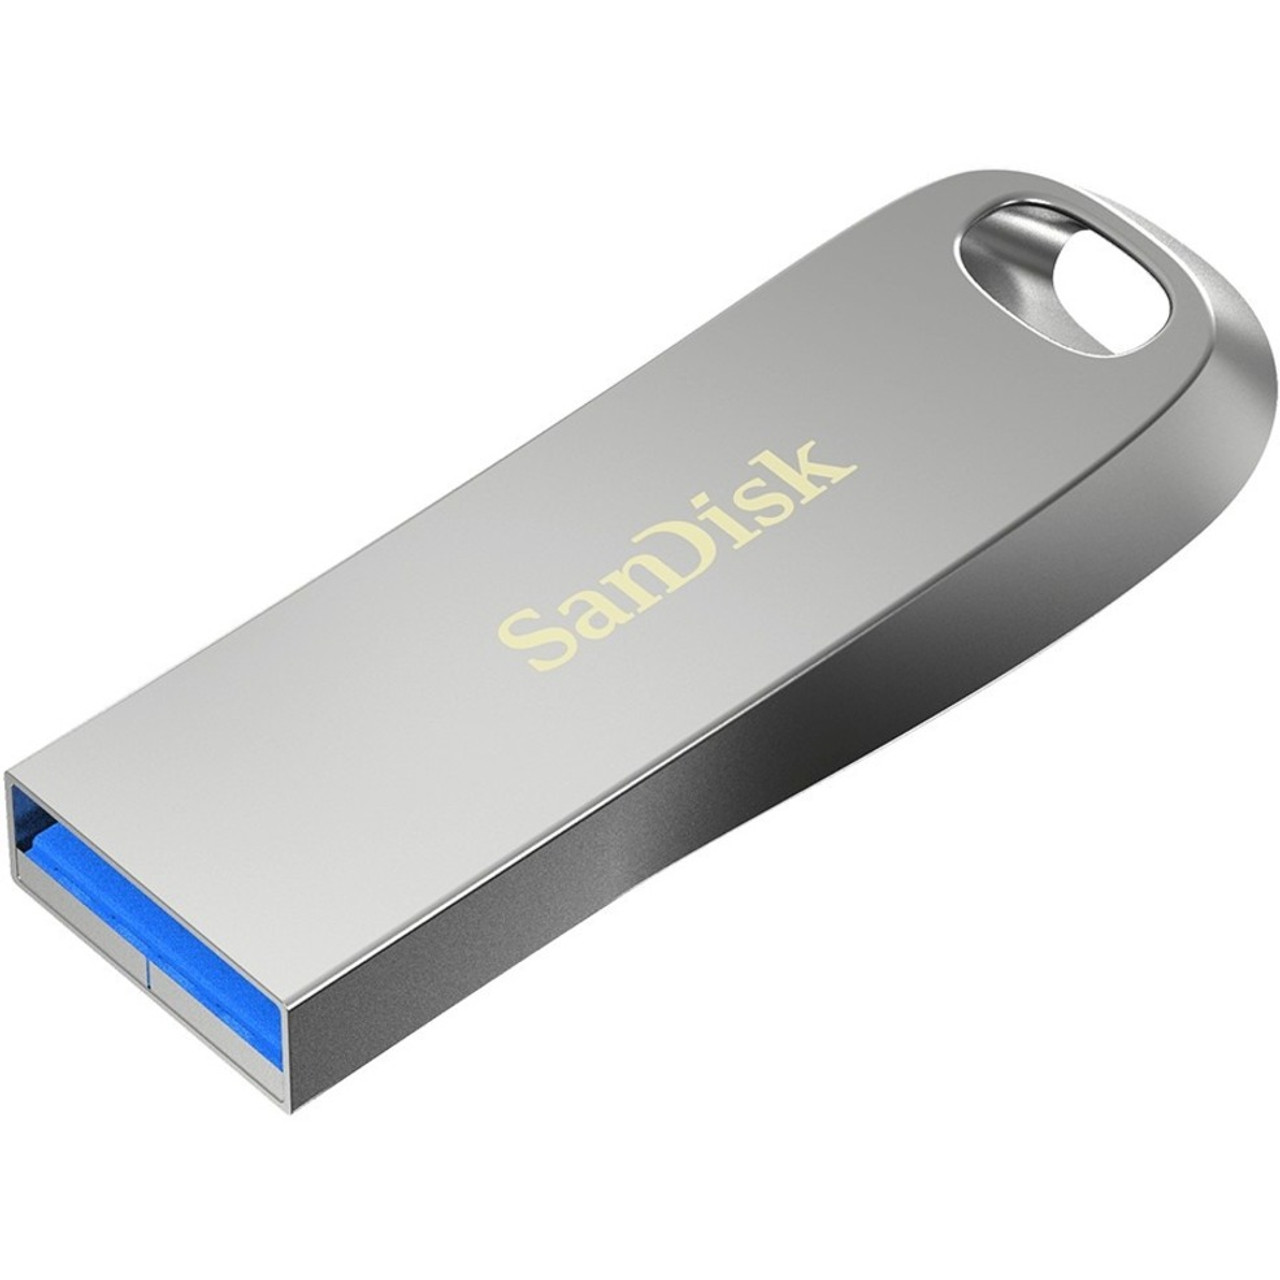 SanDisk Ultra Luxe? USB 3.1 Flash Drive 128GB - SDCZ74-128G-A46